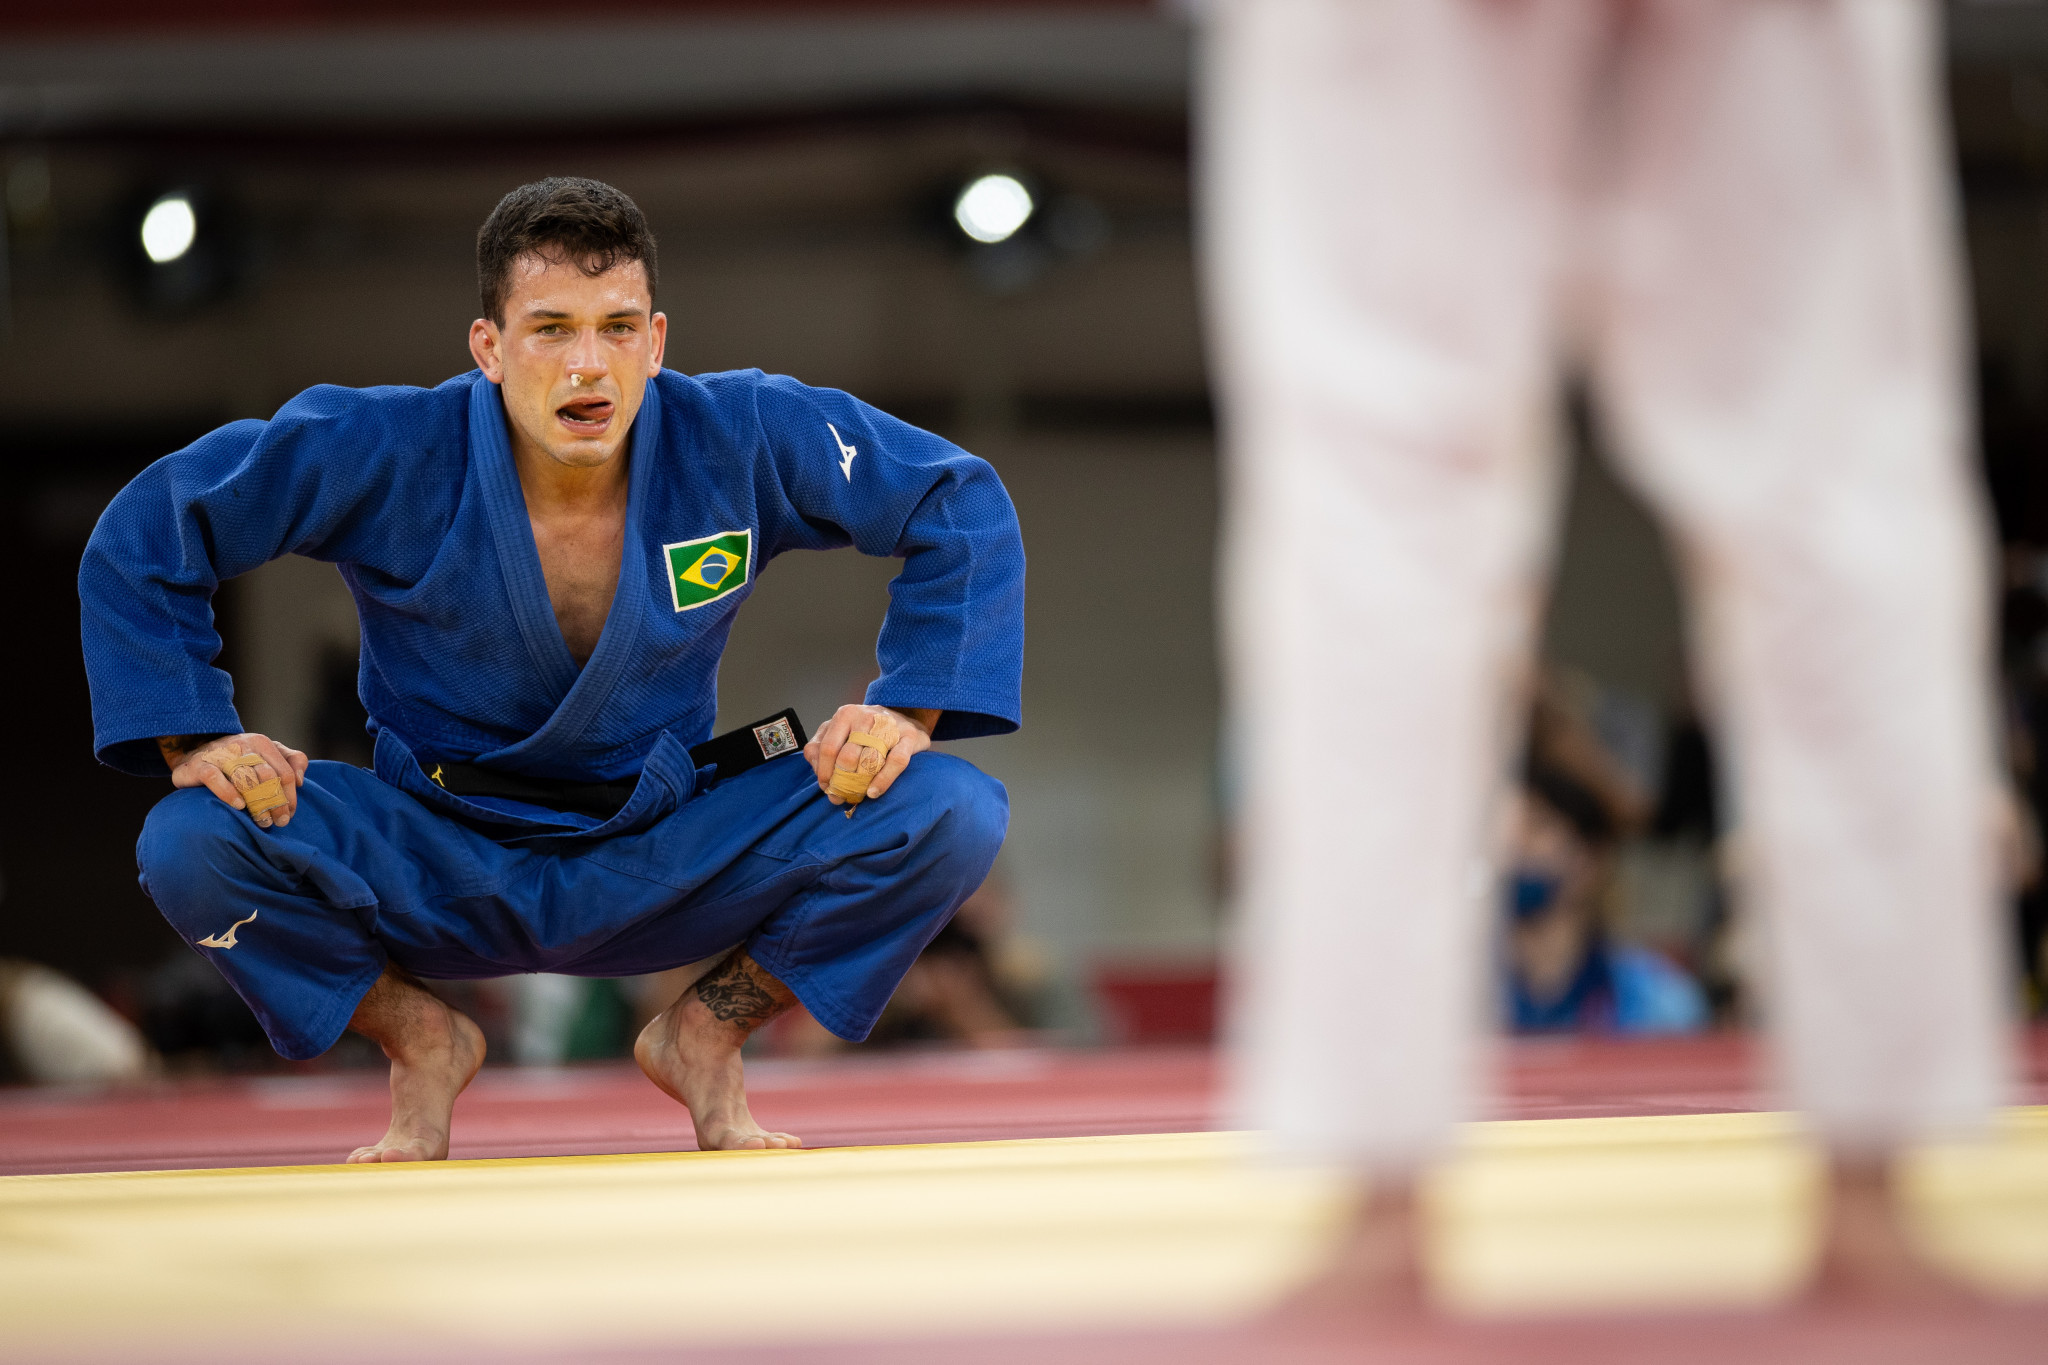 Tokyo 2020 bronze medallist Daniel Cargnin is among the representatives from Brazil, the most-successful nation at the last three Pan American Judo Championships, on the entry list in Lima ©Getty Images